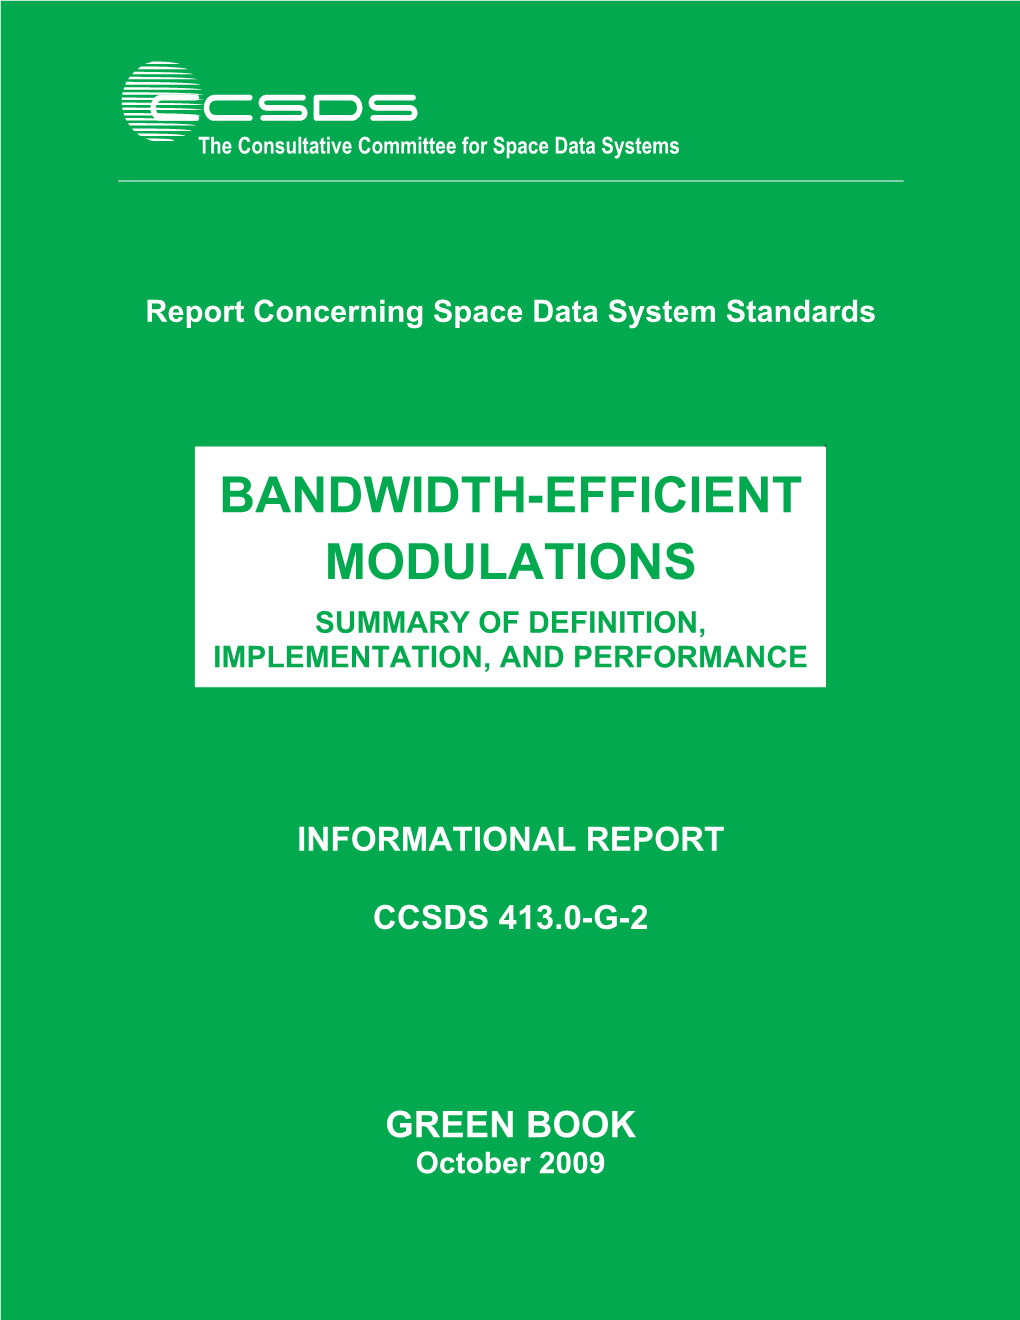 Bandwidth-Efficient Modulations Summary of Definition, Implementation, and Performance